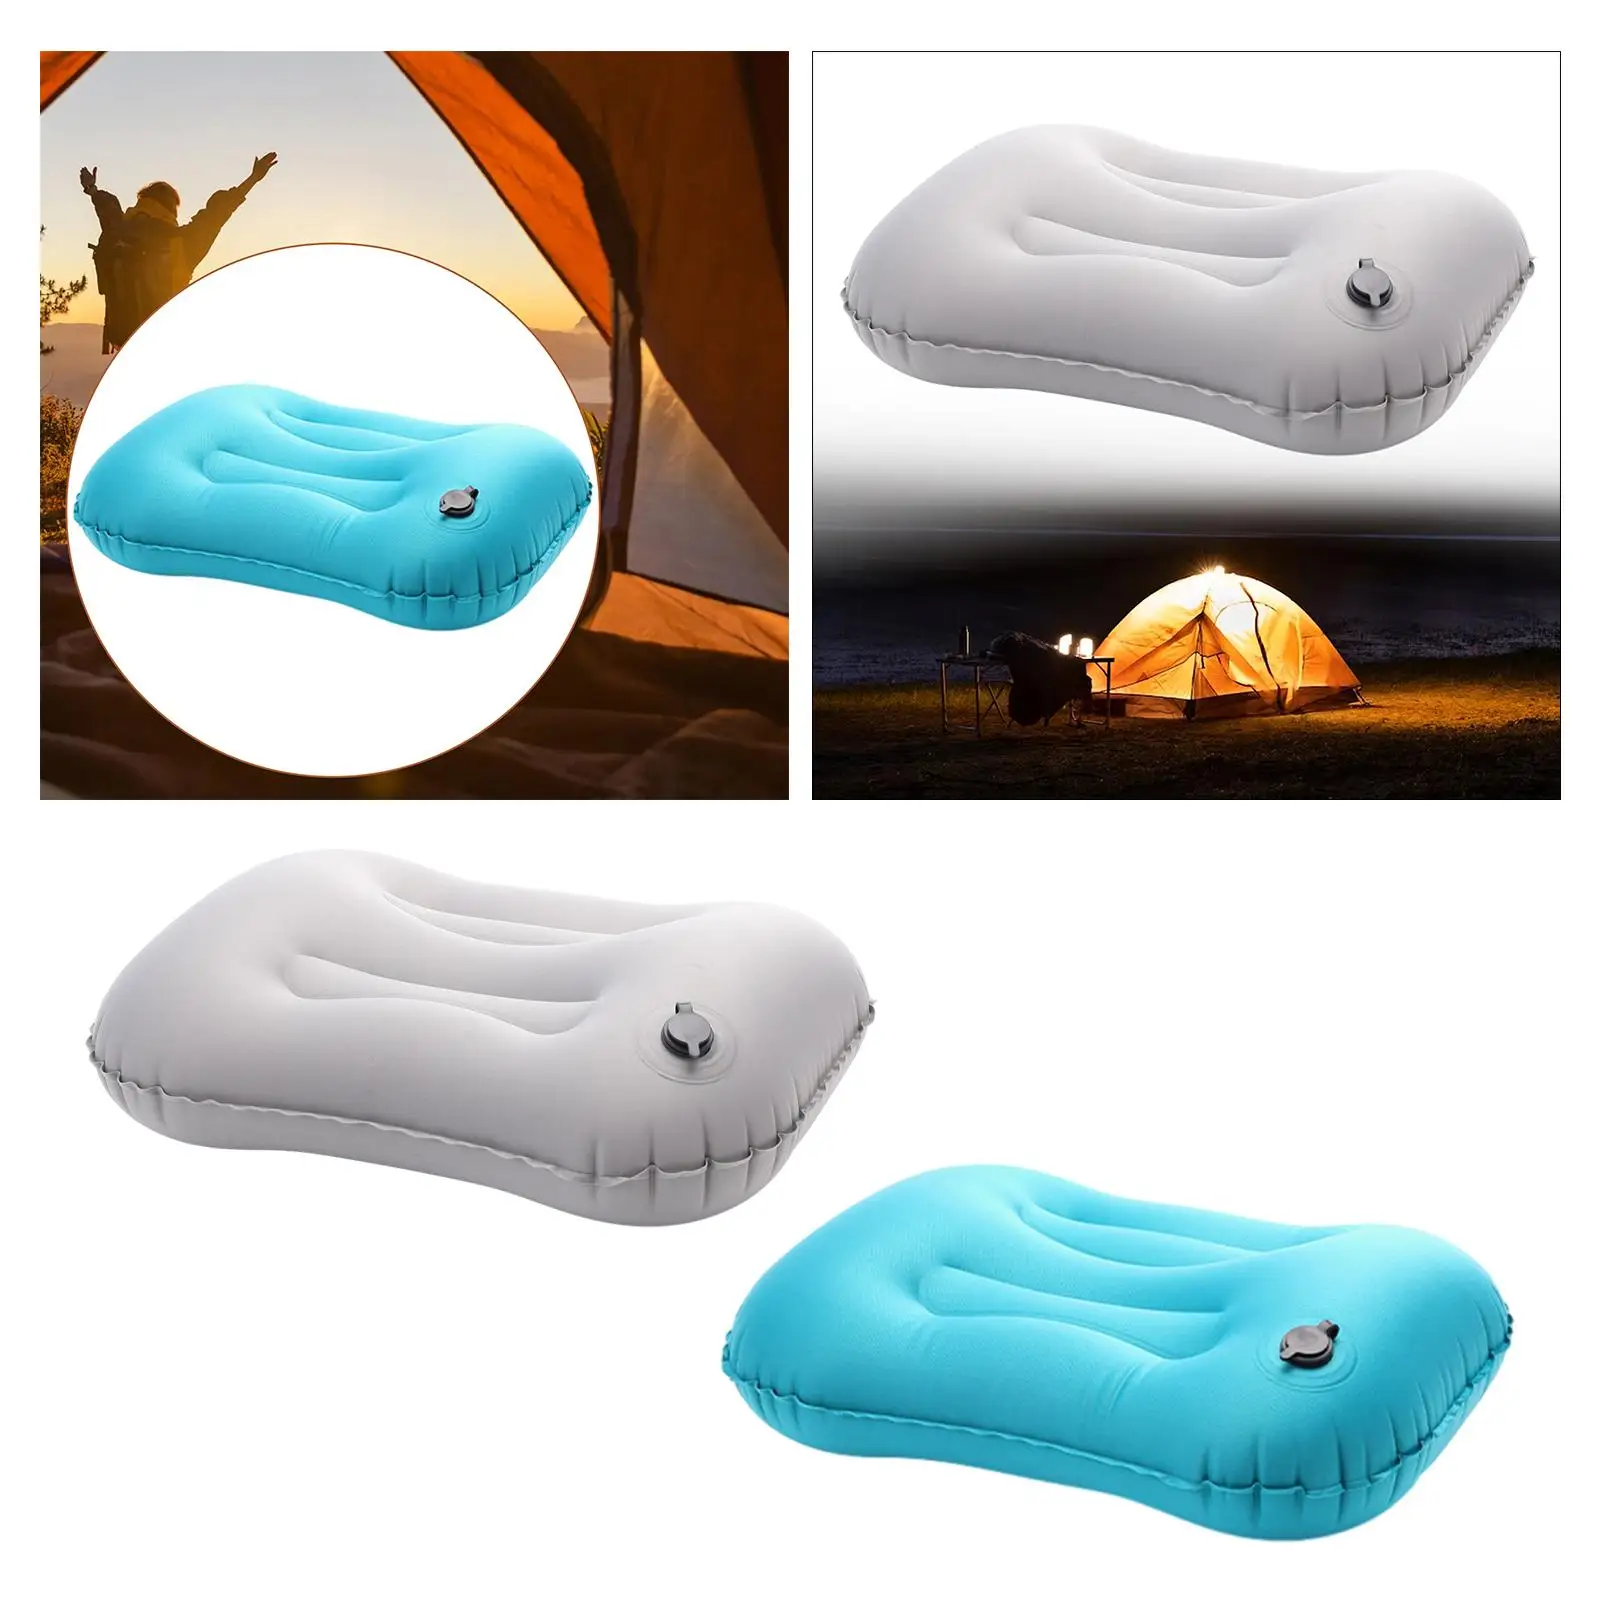 Camping Inflatable Pillow Lightweight for Neck Lumbar Support Travel Pillow for Backpacking Hiking Hammock Traveling Nap Rest